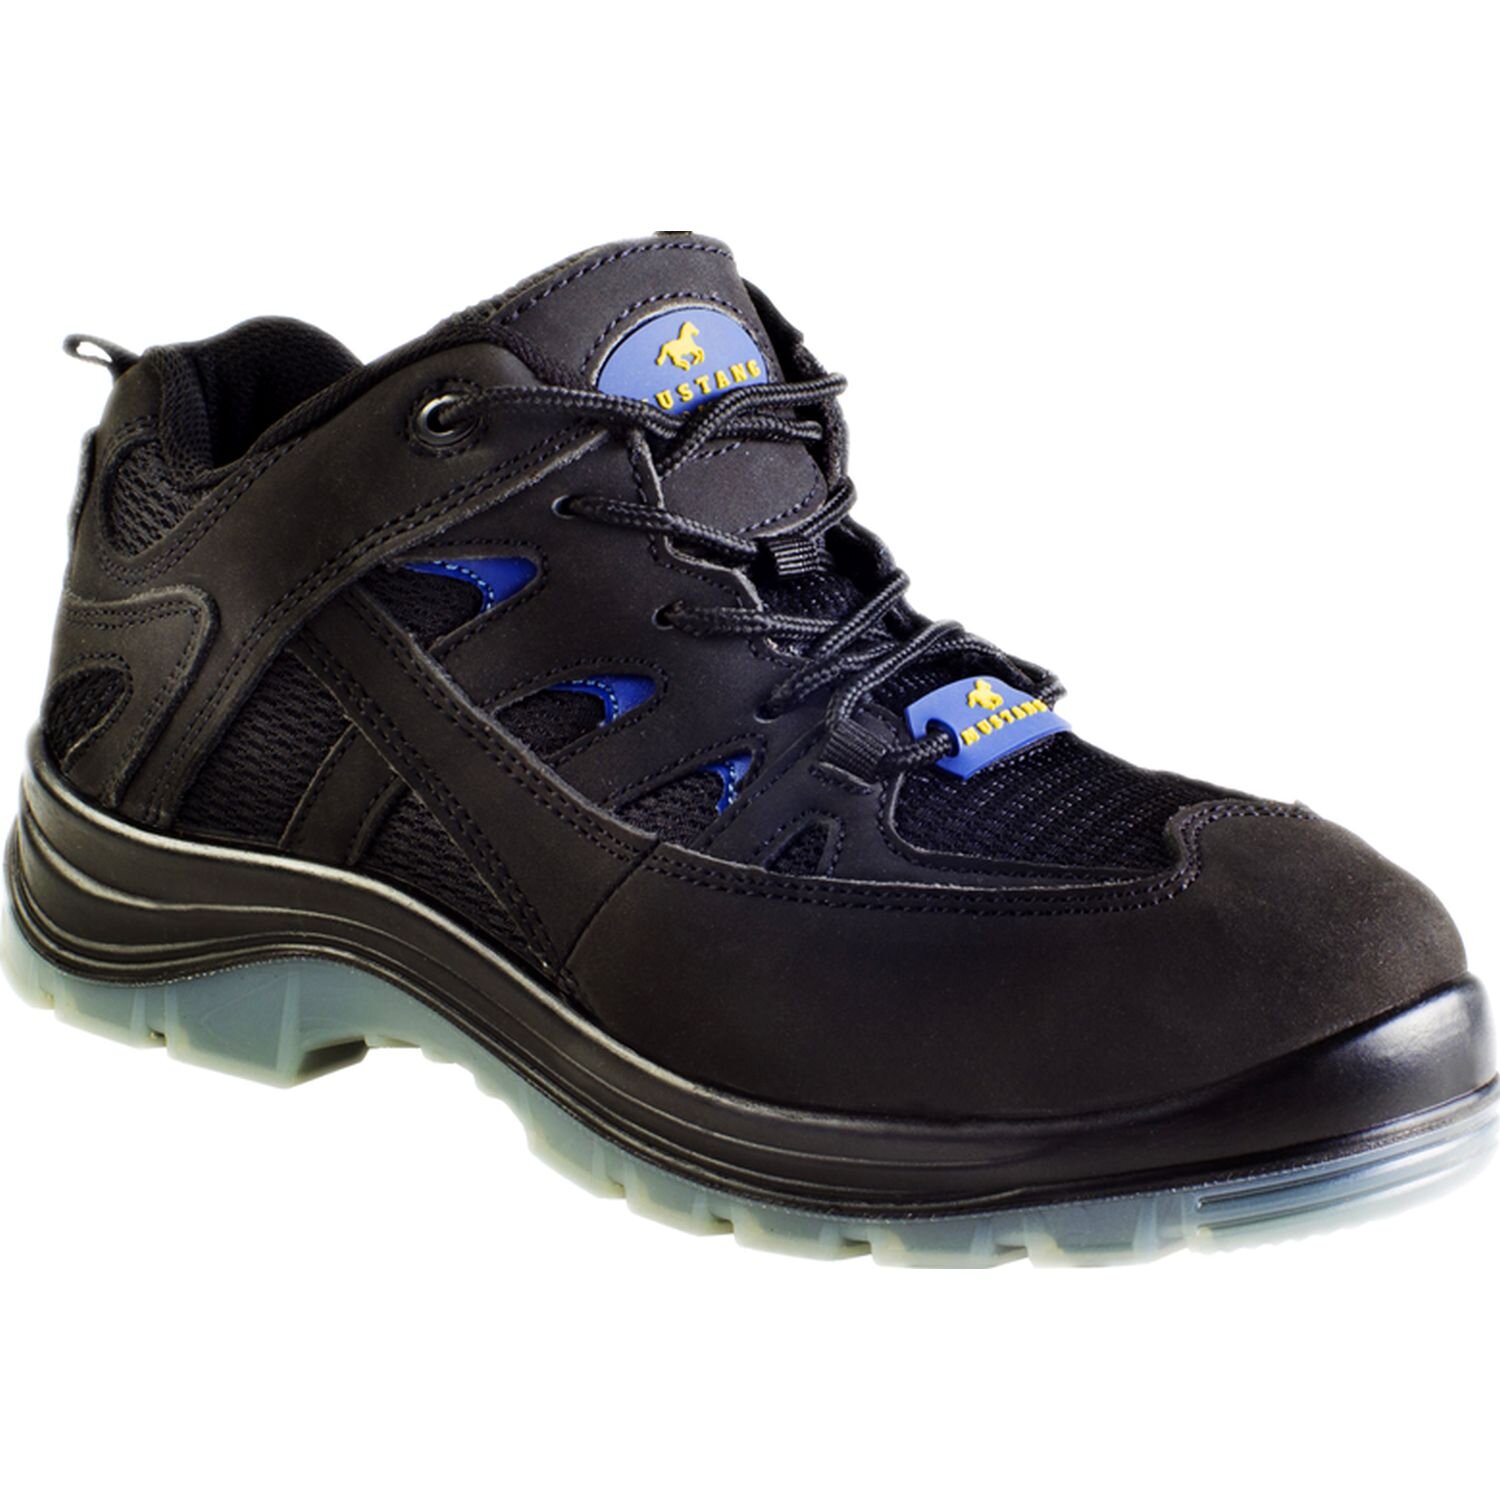 Mustang Kingston Rule 7580 TPU Sole Lace Up Safety Shoe